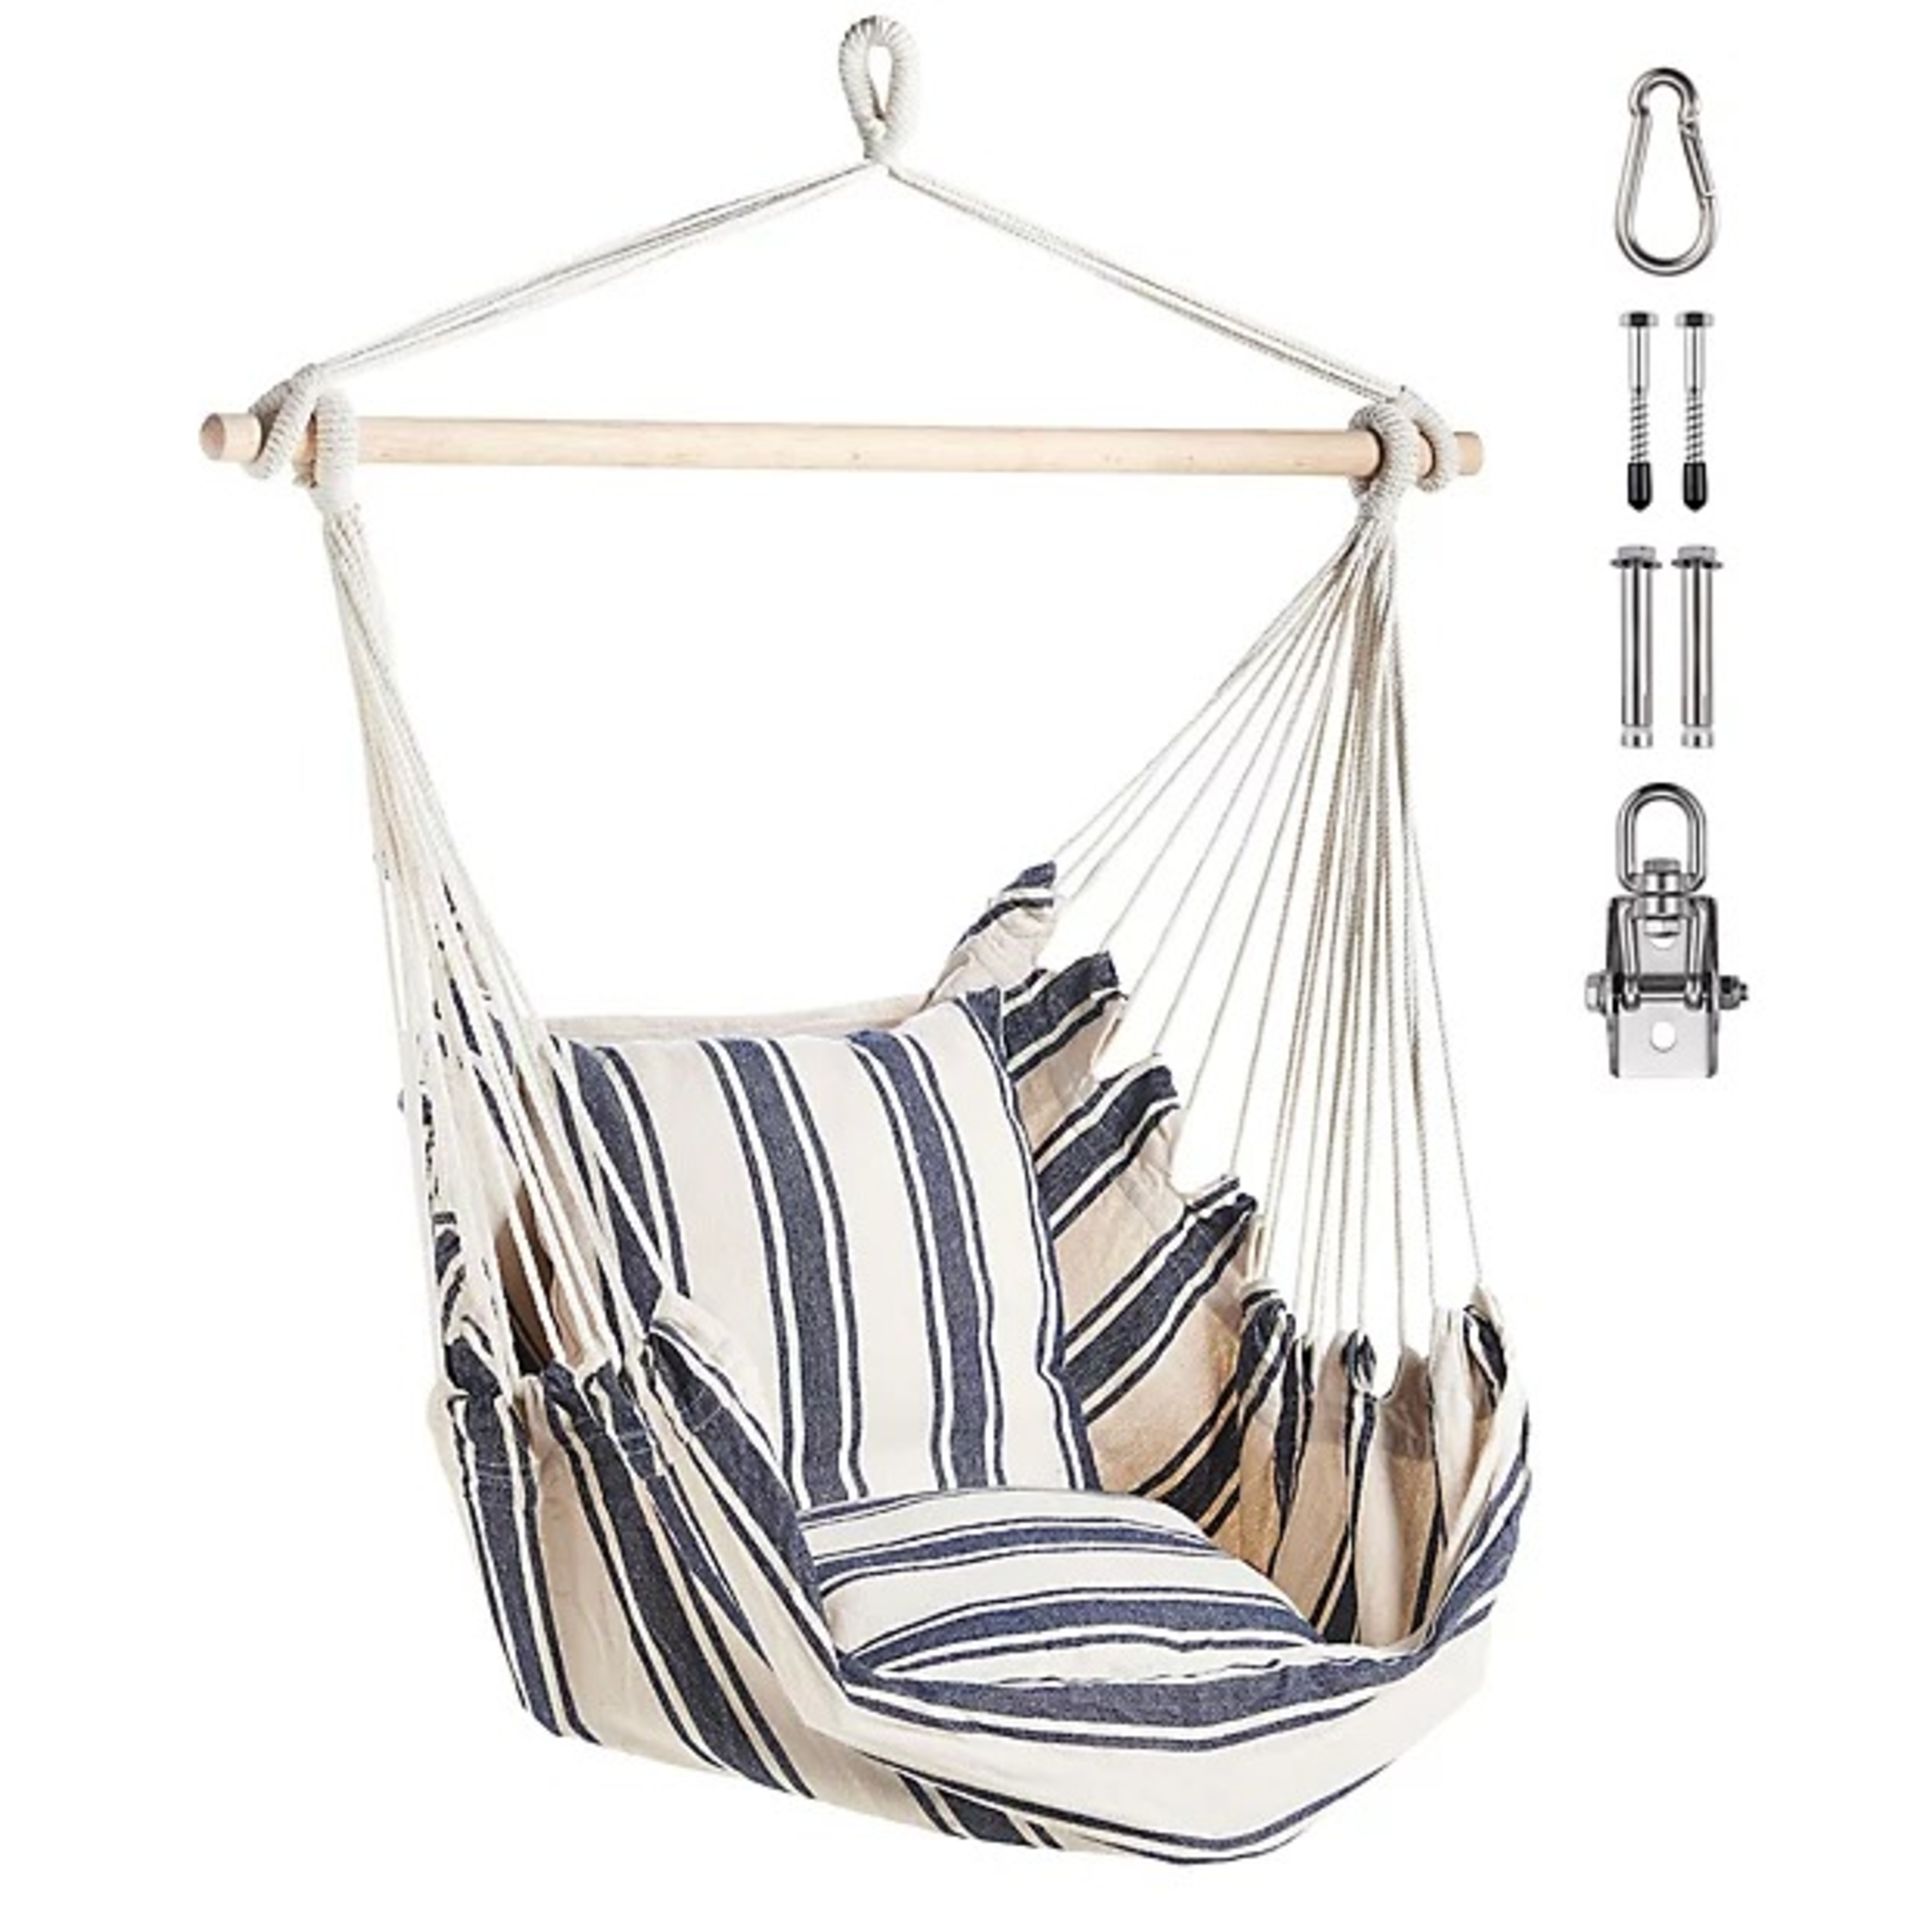 Hanging Chair, Blue and White Striped Garden Hammock Chair Swing Seat - ER37